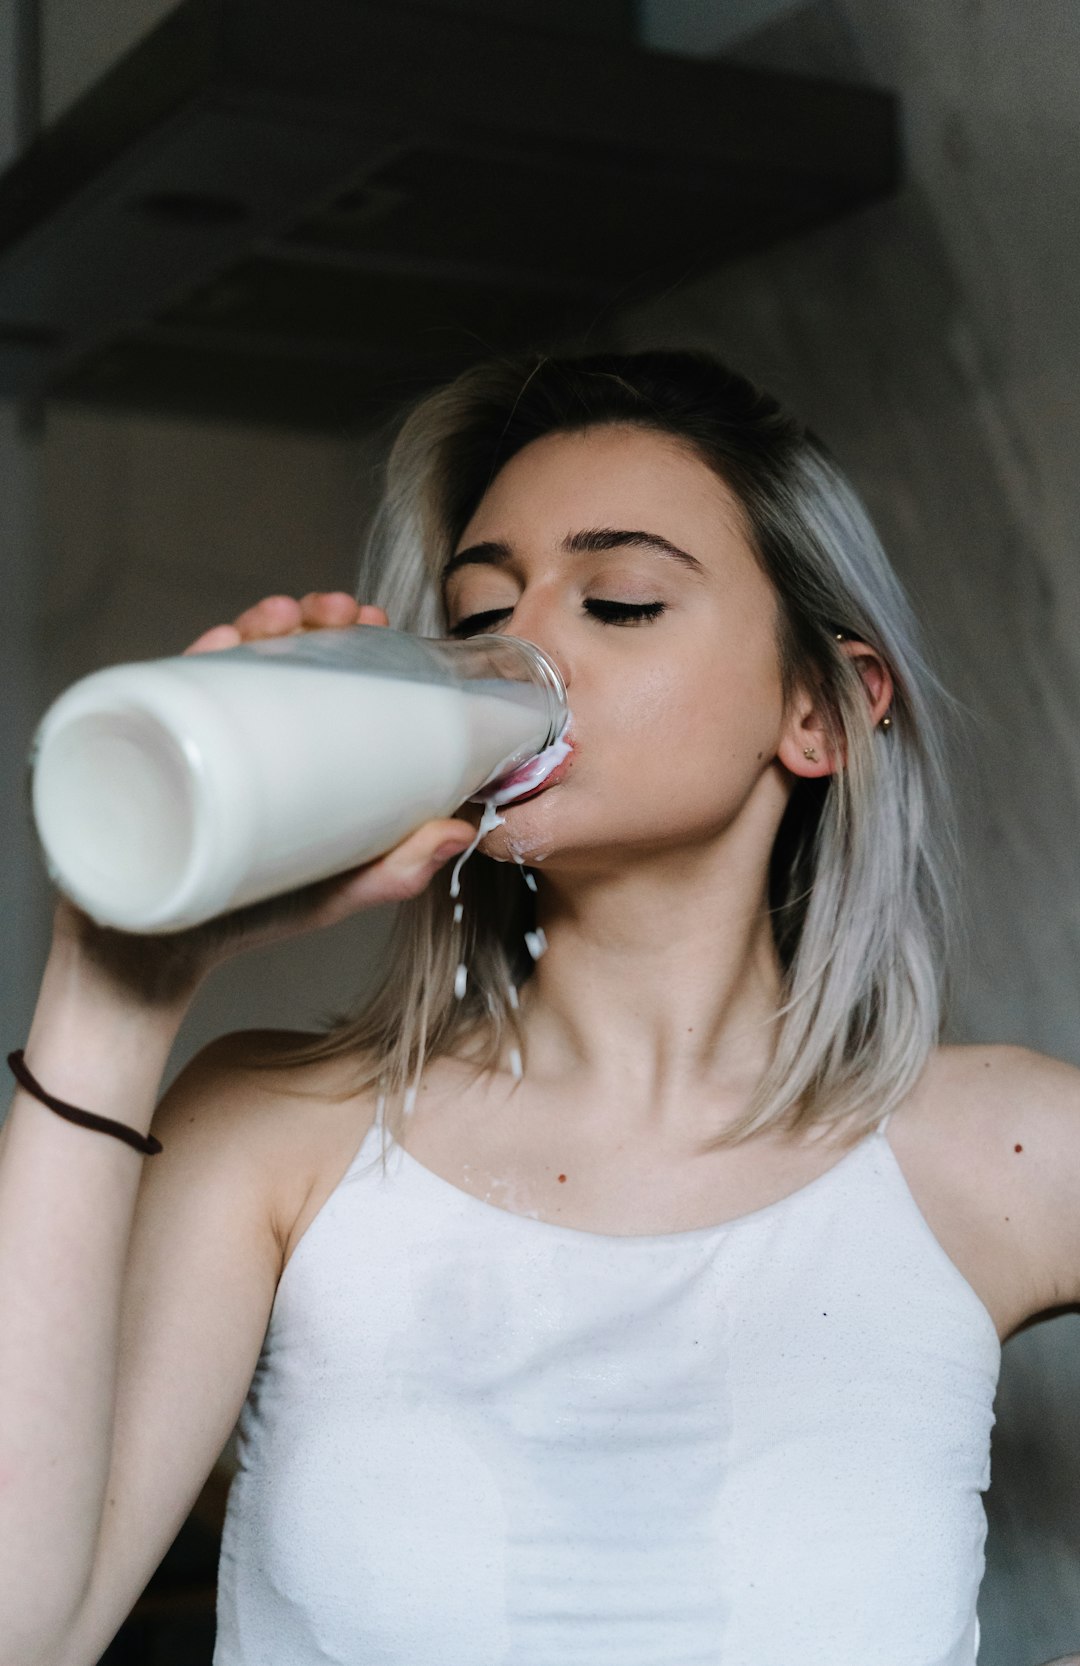 woman in white tank top drinking milk from clear drinking glass